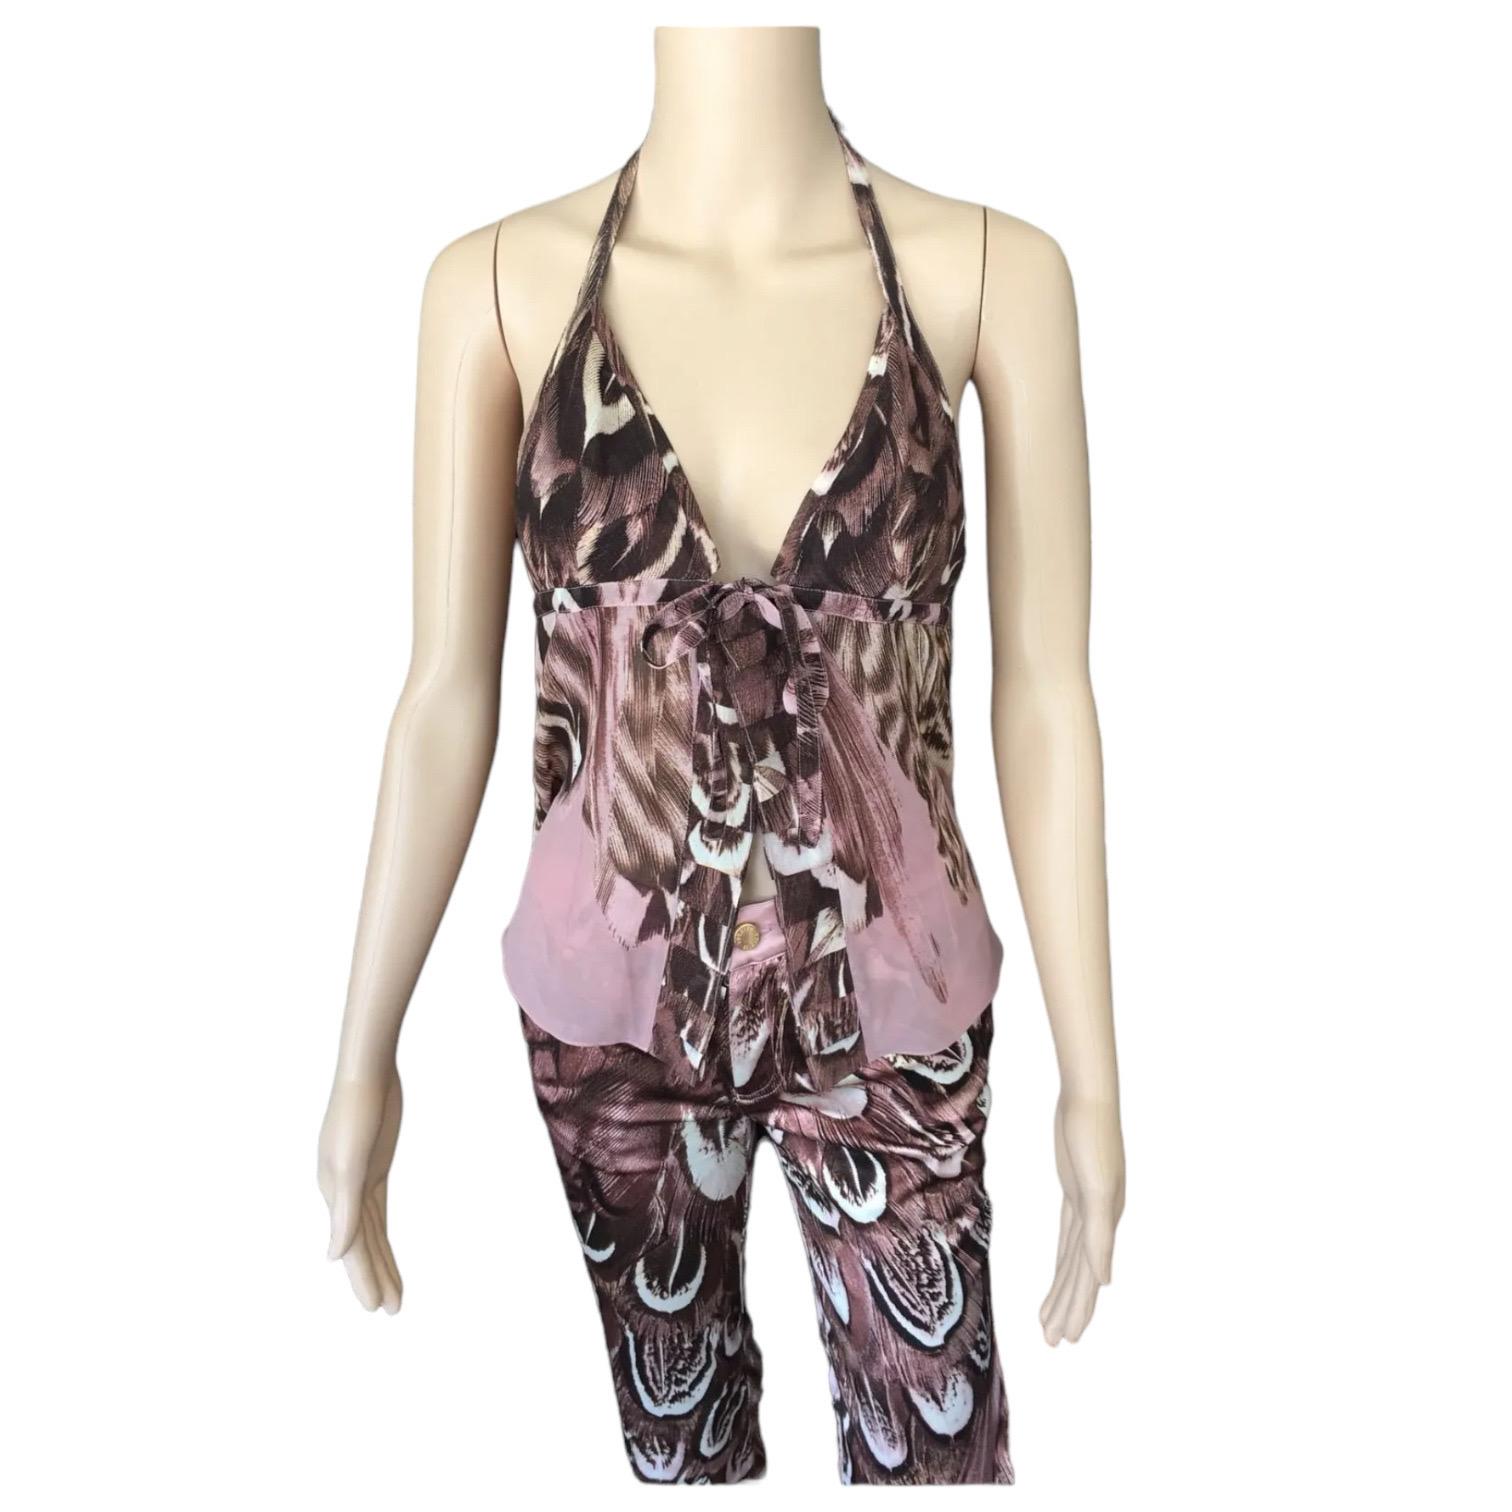 Roberto Cavalli S/S 2005 Feather Print Halter Top & Pants 2 Piece Set Ensemble

Please note the top is designer size IT 40 and the pants are IT 38.

FOLLOW US ON INSTAGRAM @OPULENTADDICT
